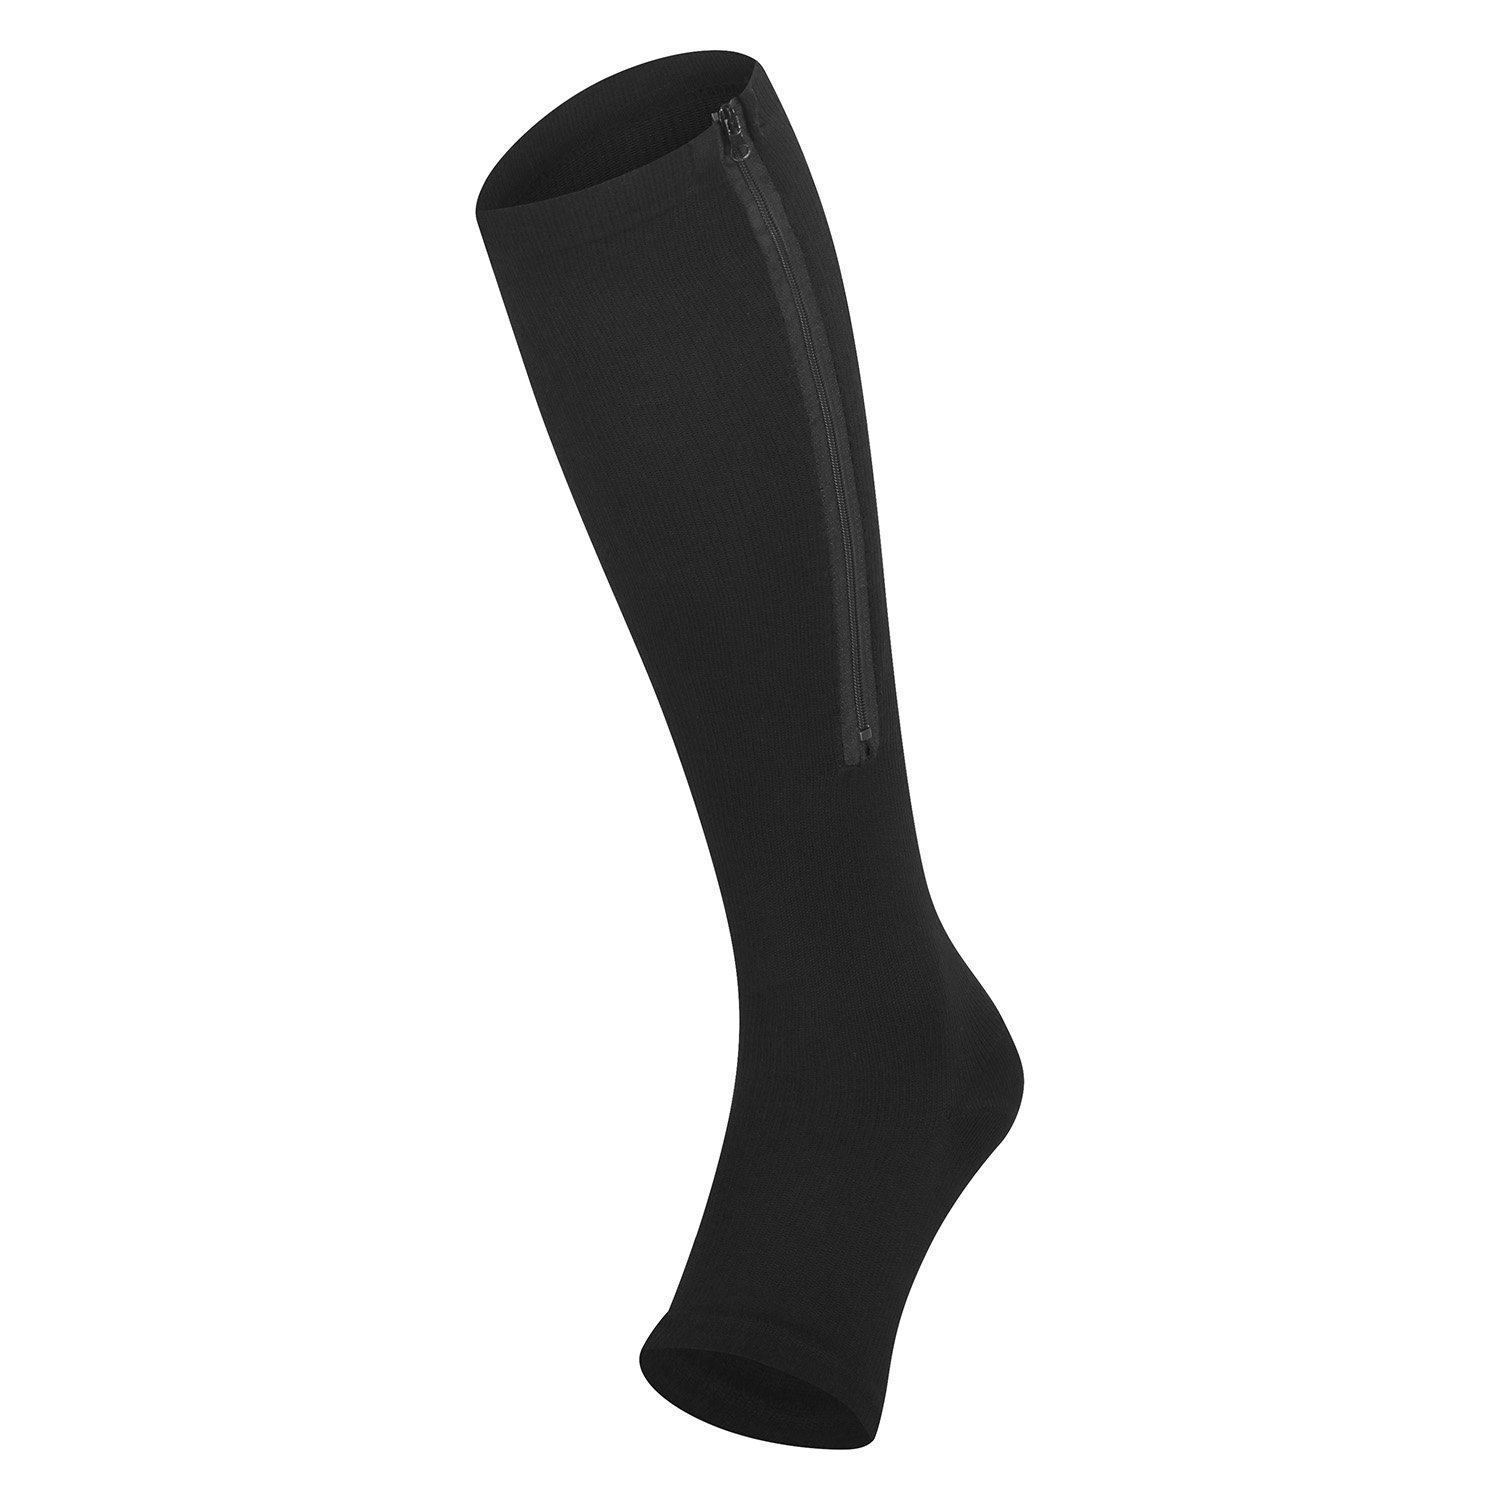 Support Stocking with Zipper - Open Toe - Available in Black and Beige (per pair)